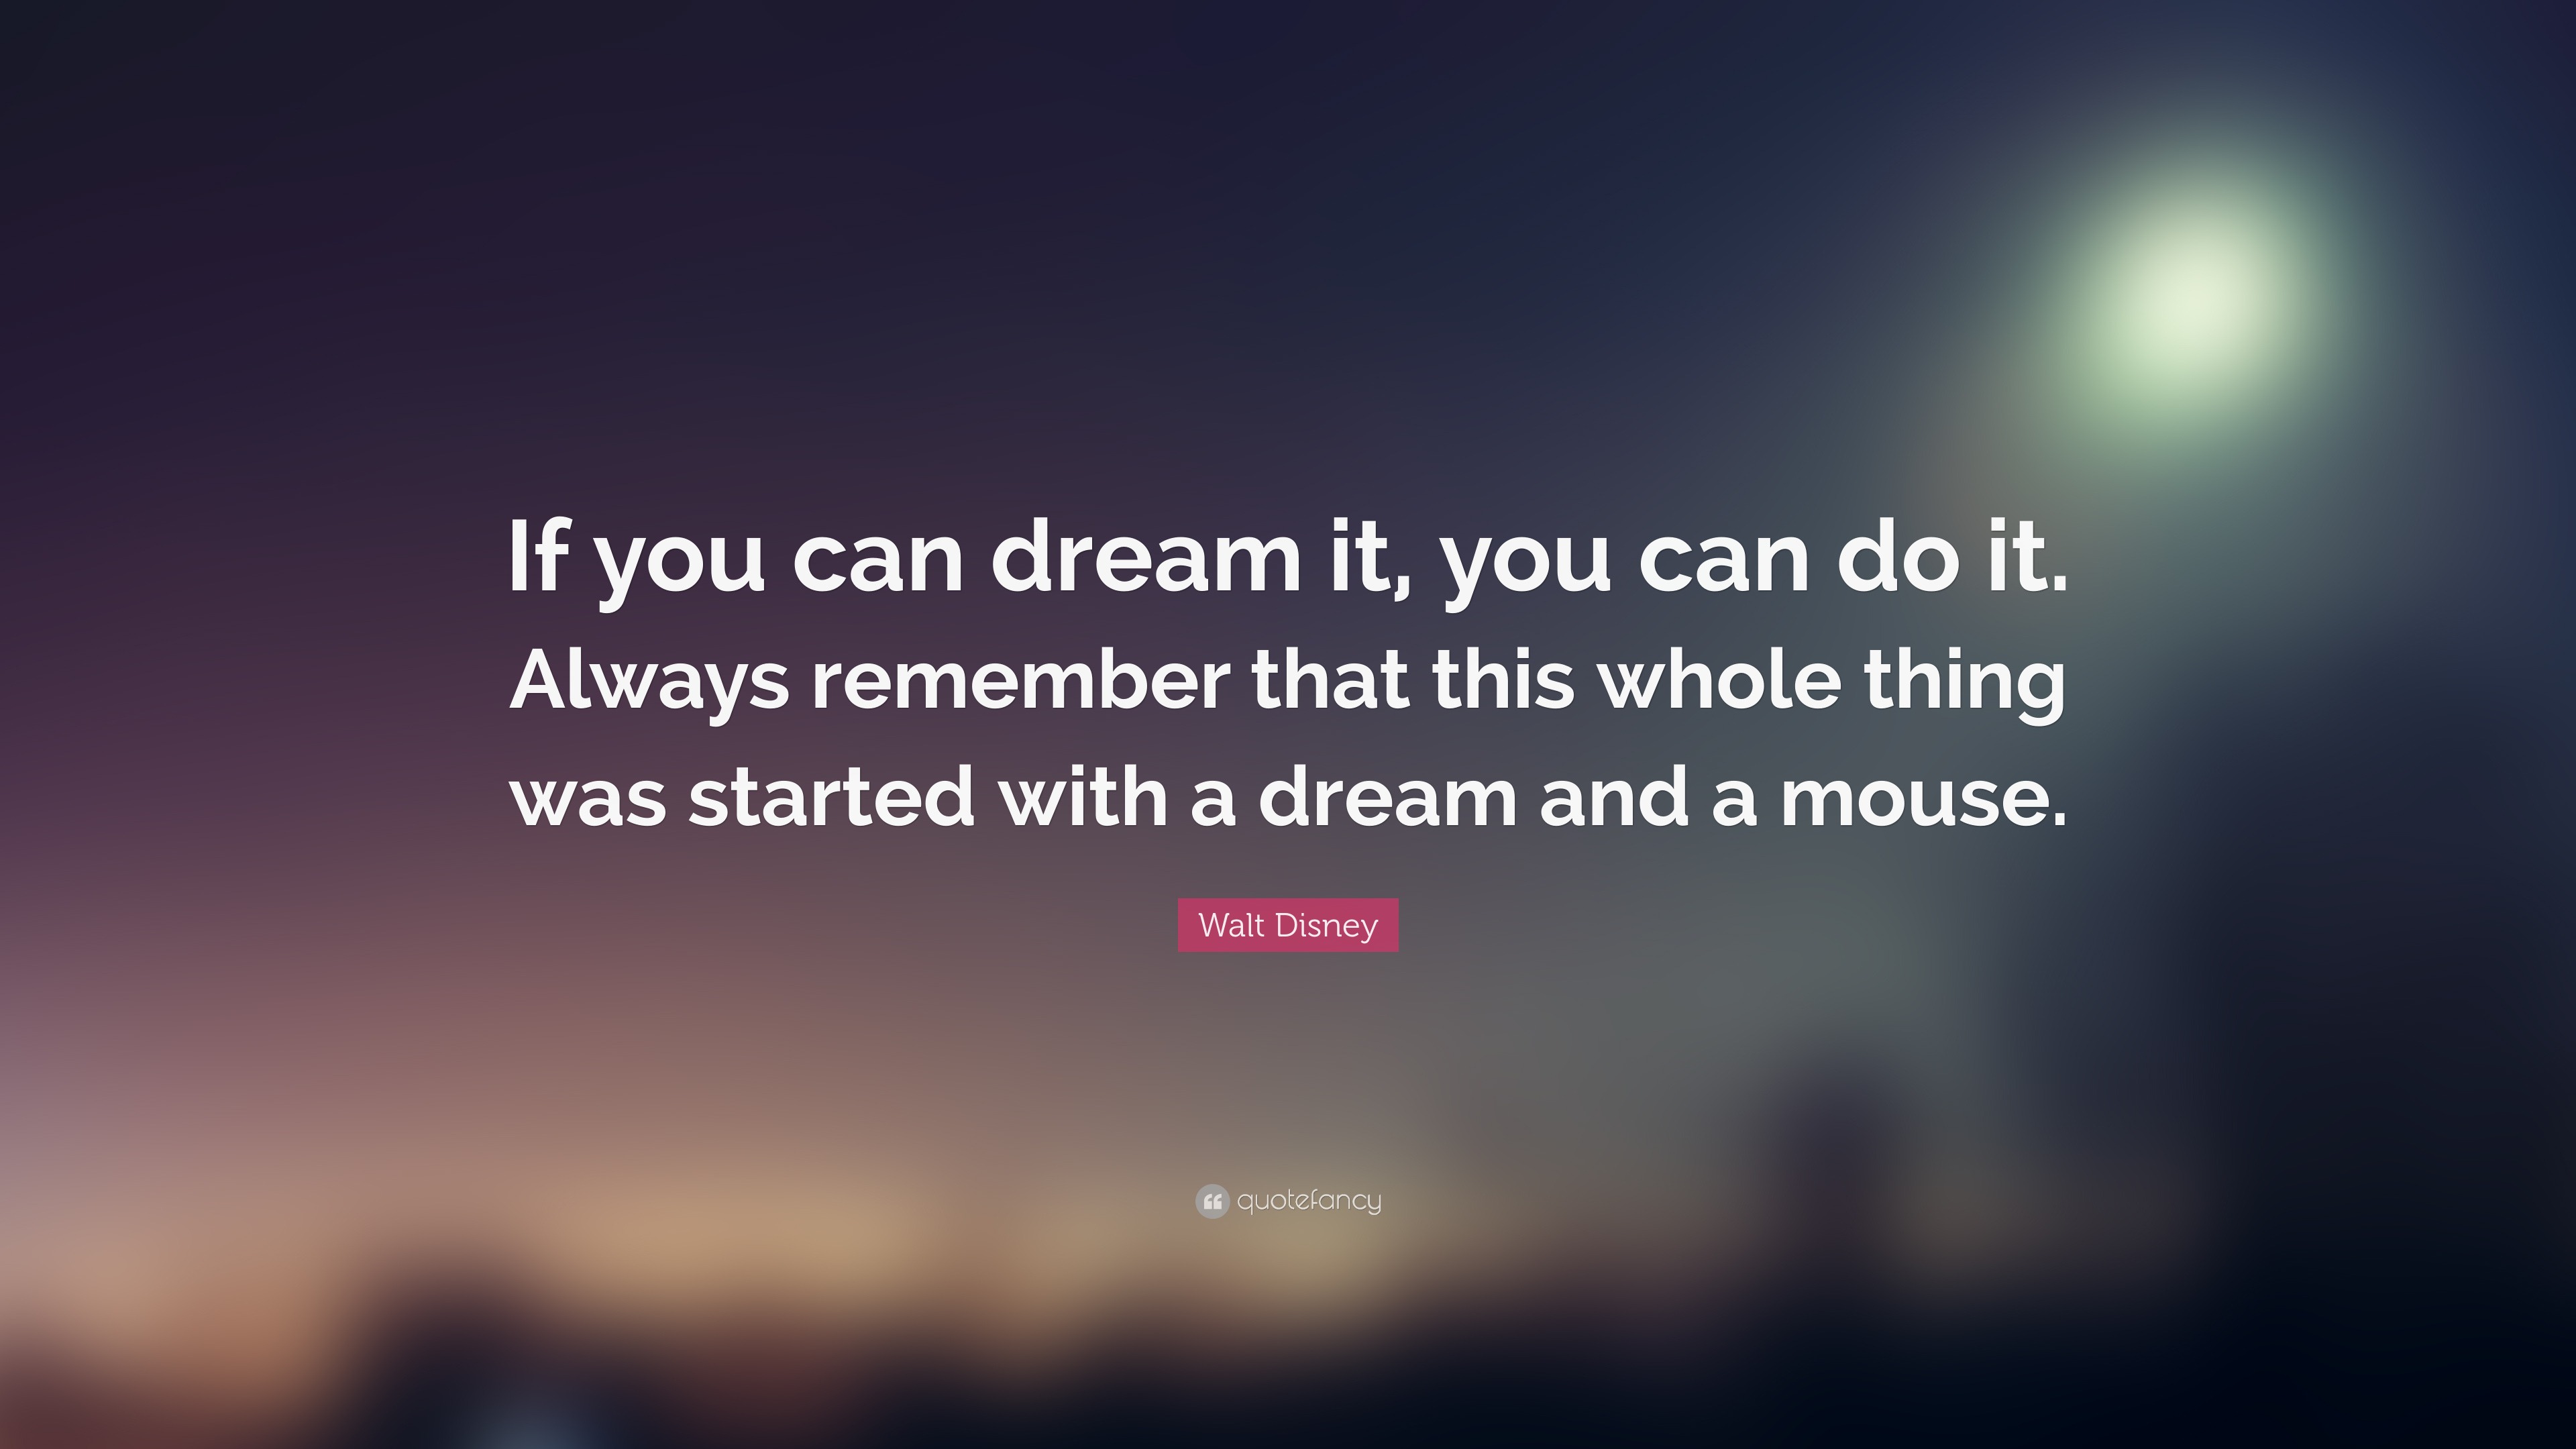 Walt Disney Quote: “If you can dream it, you can do it. Always remember